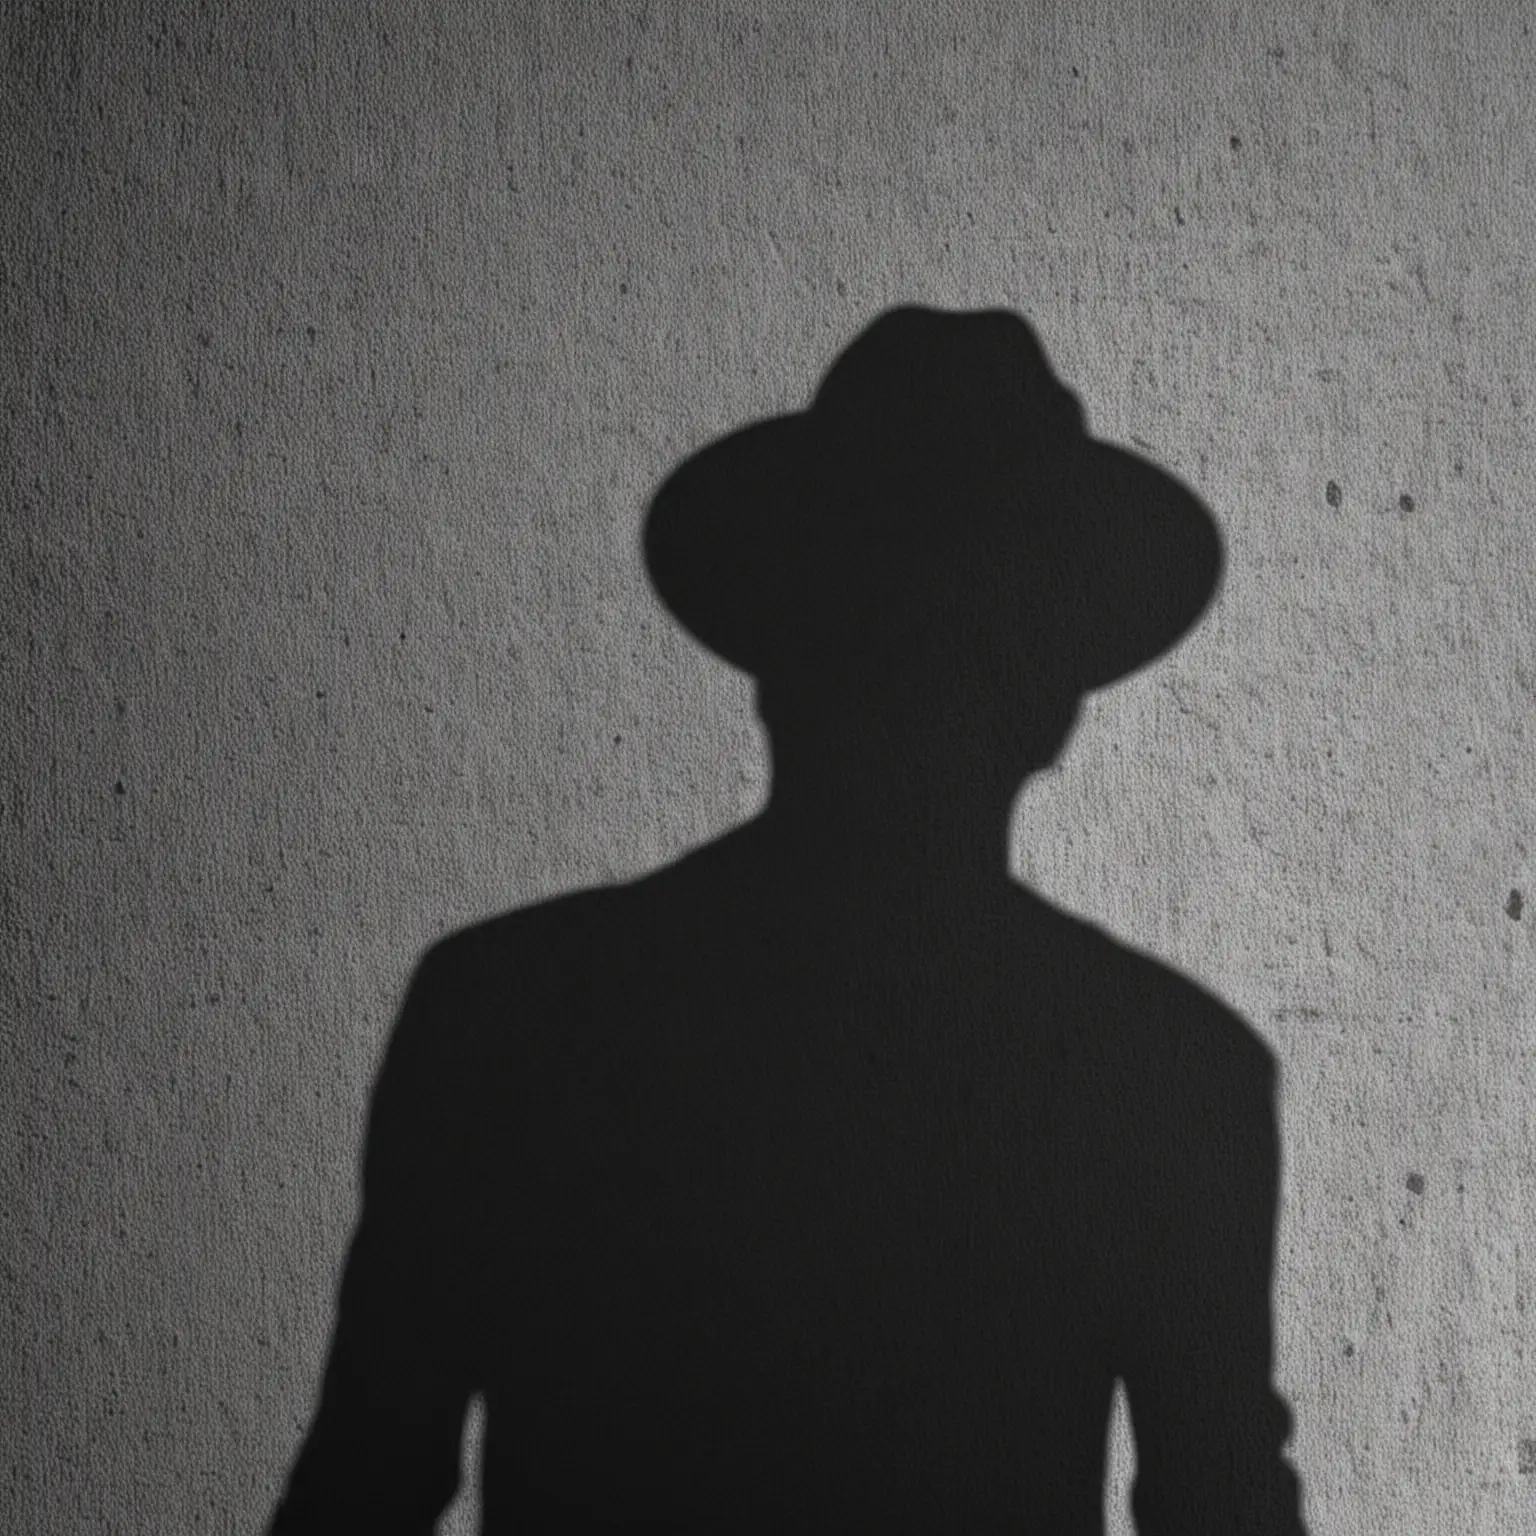 Mysterious Silhouette of a Man with a Hat in the Twilight